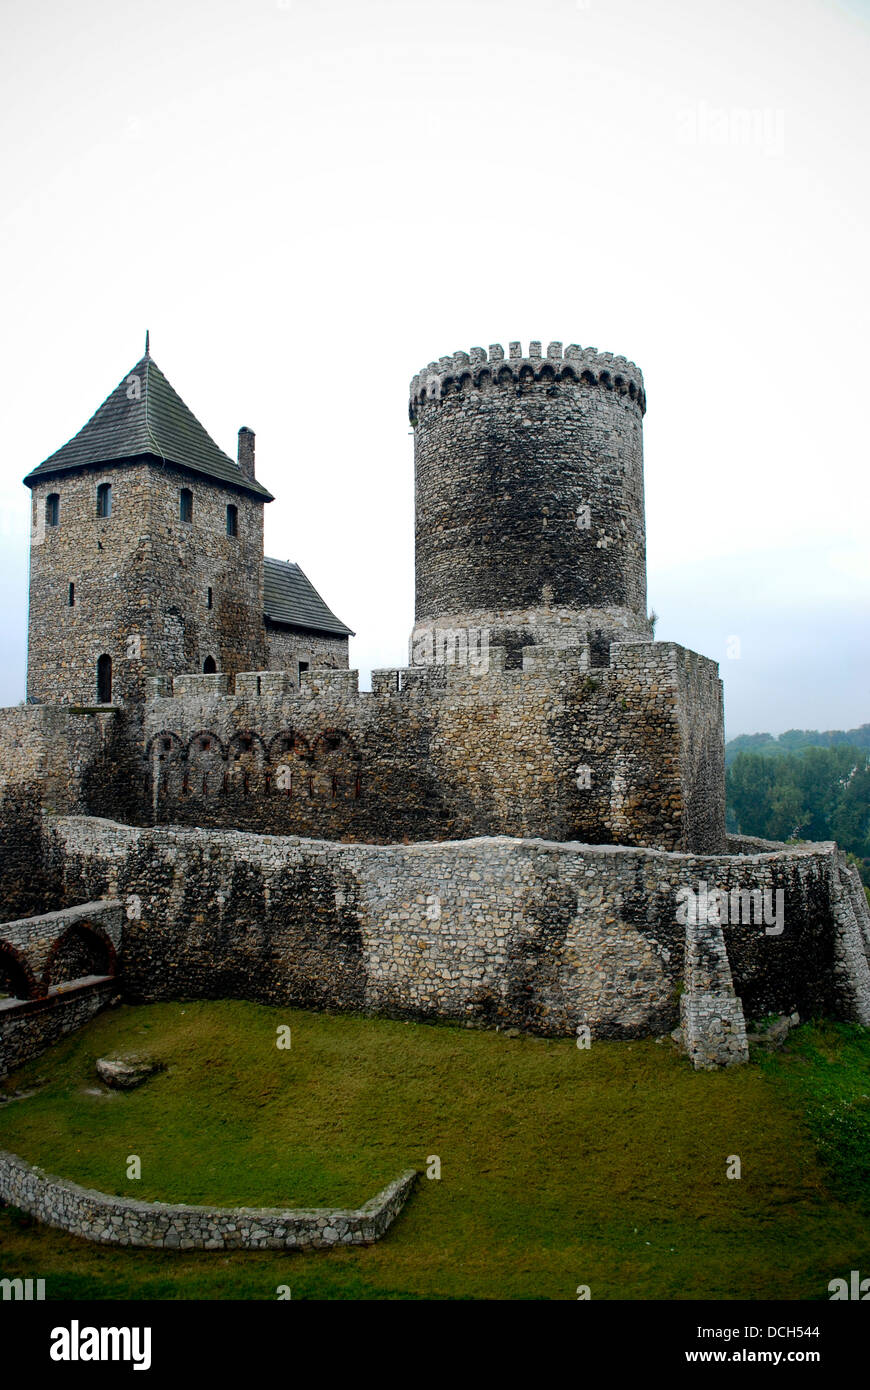 Old, historical, medieval castle in Bedzin, Poland. Stock Photo